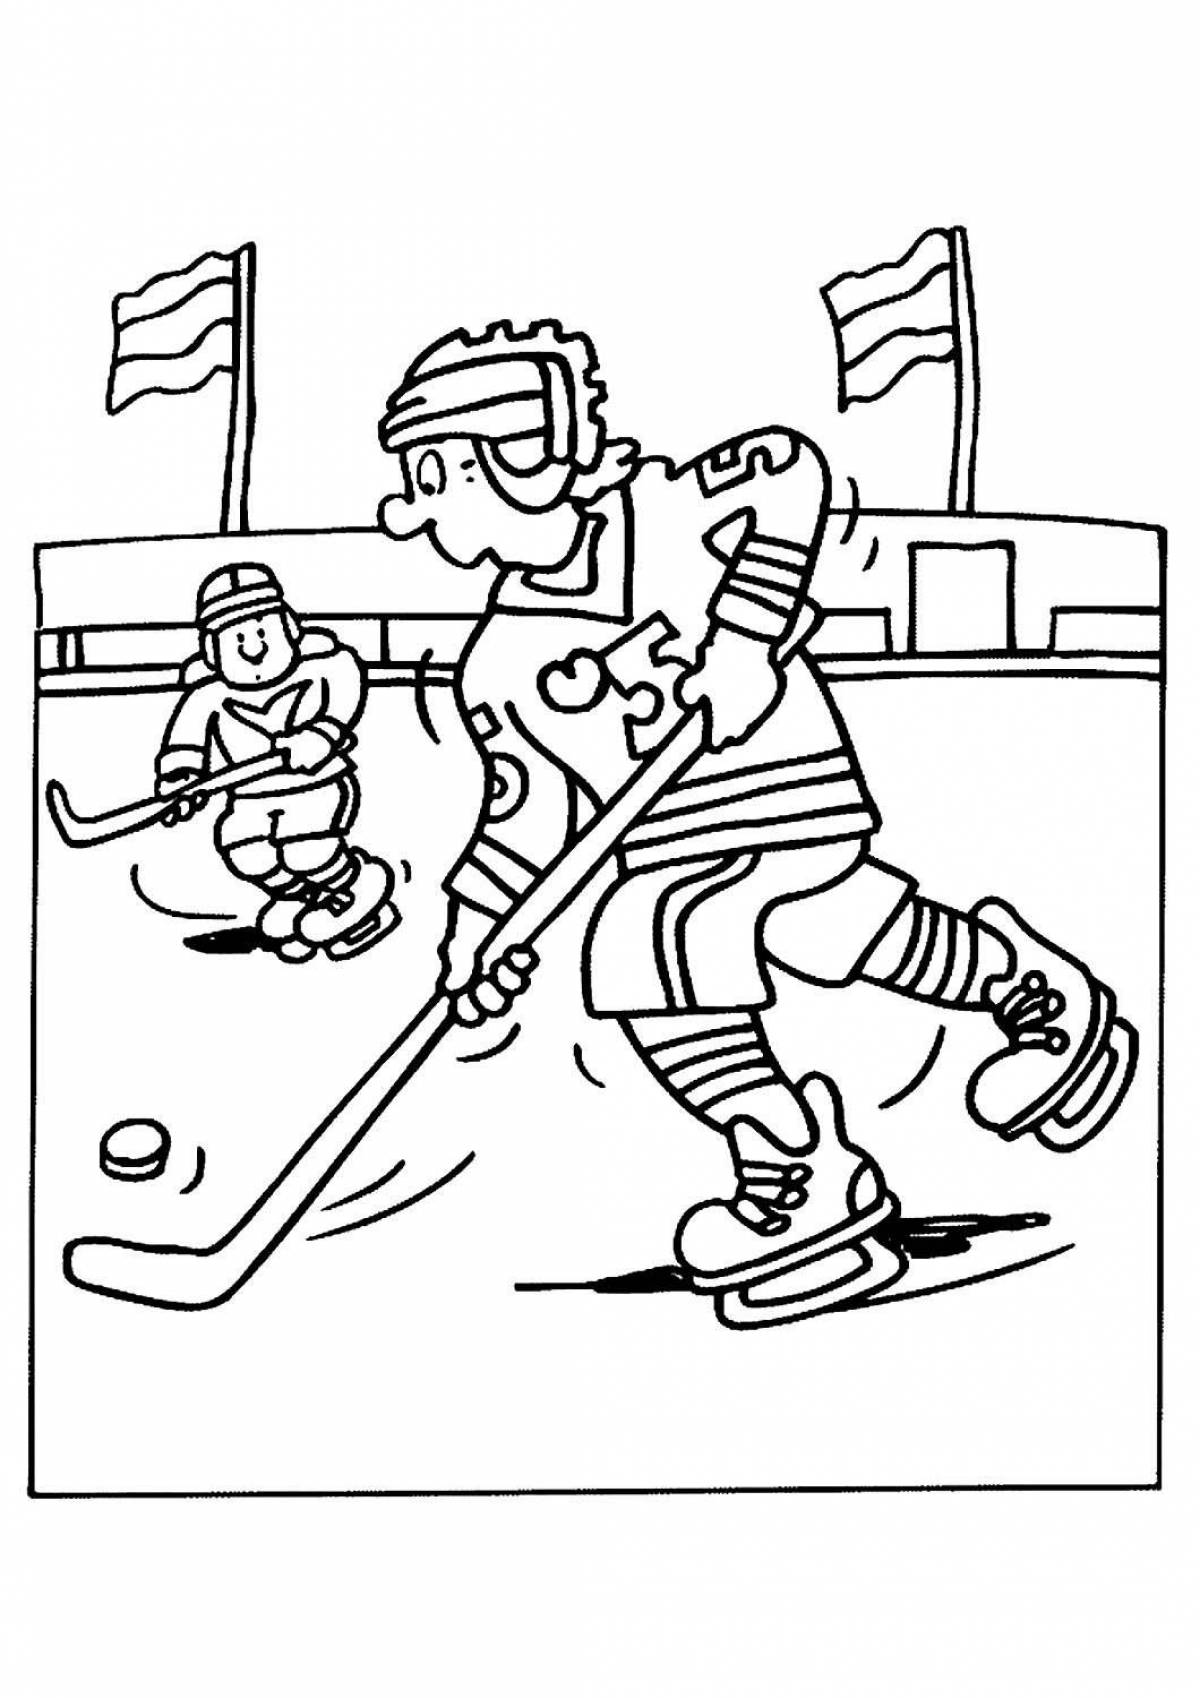 Fun Hockey player coloring book for kids